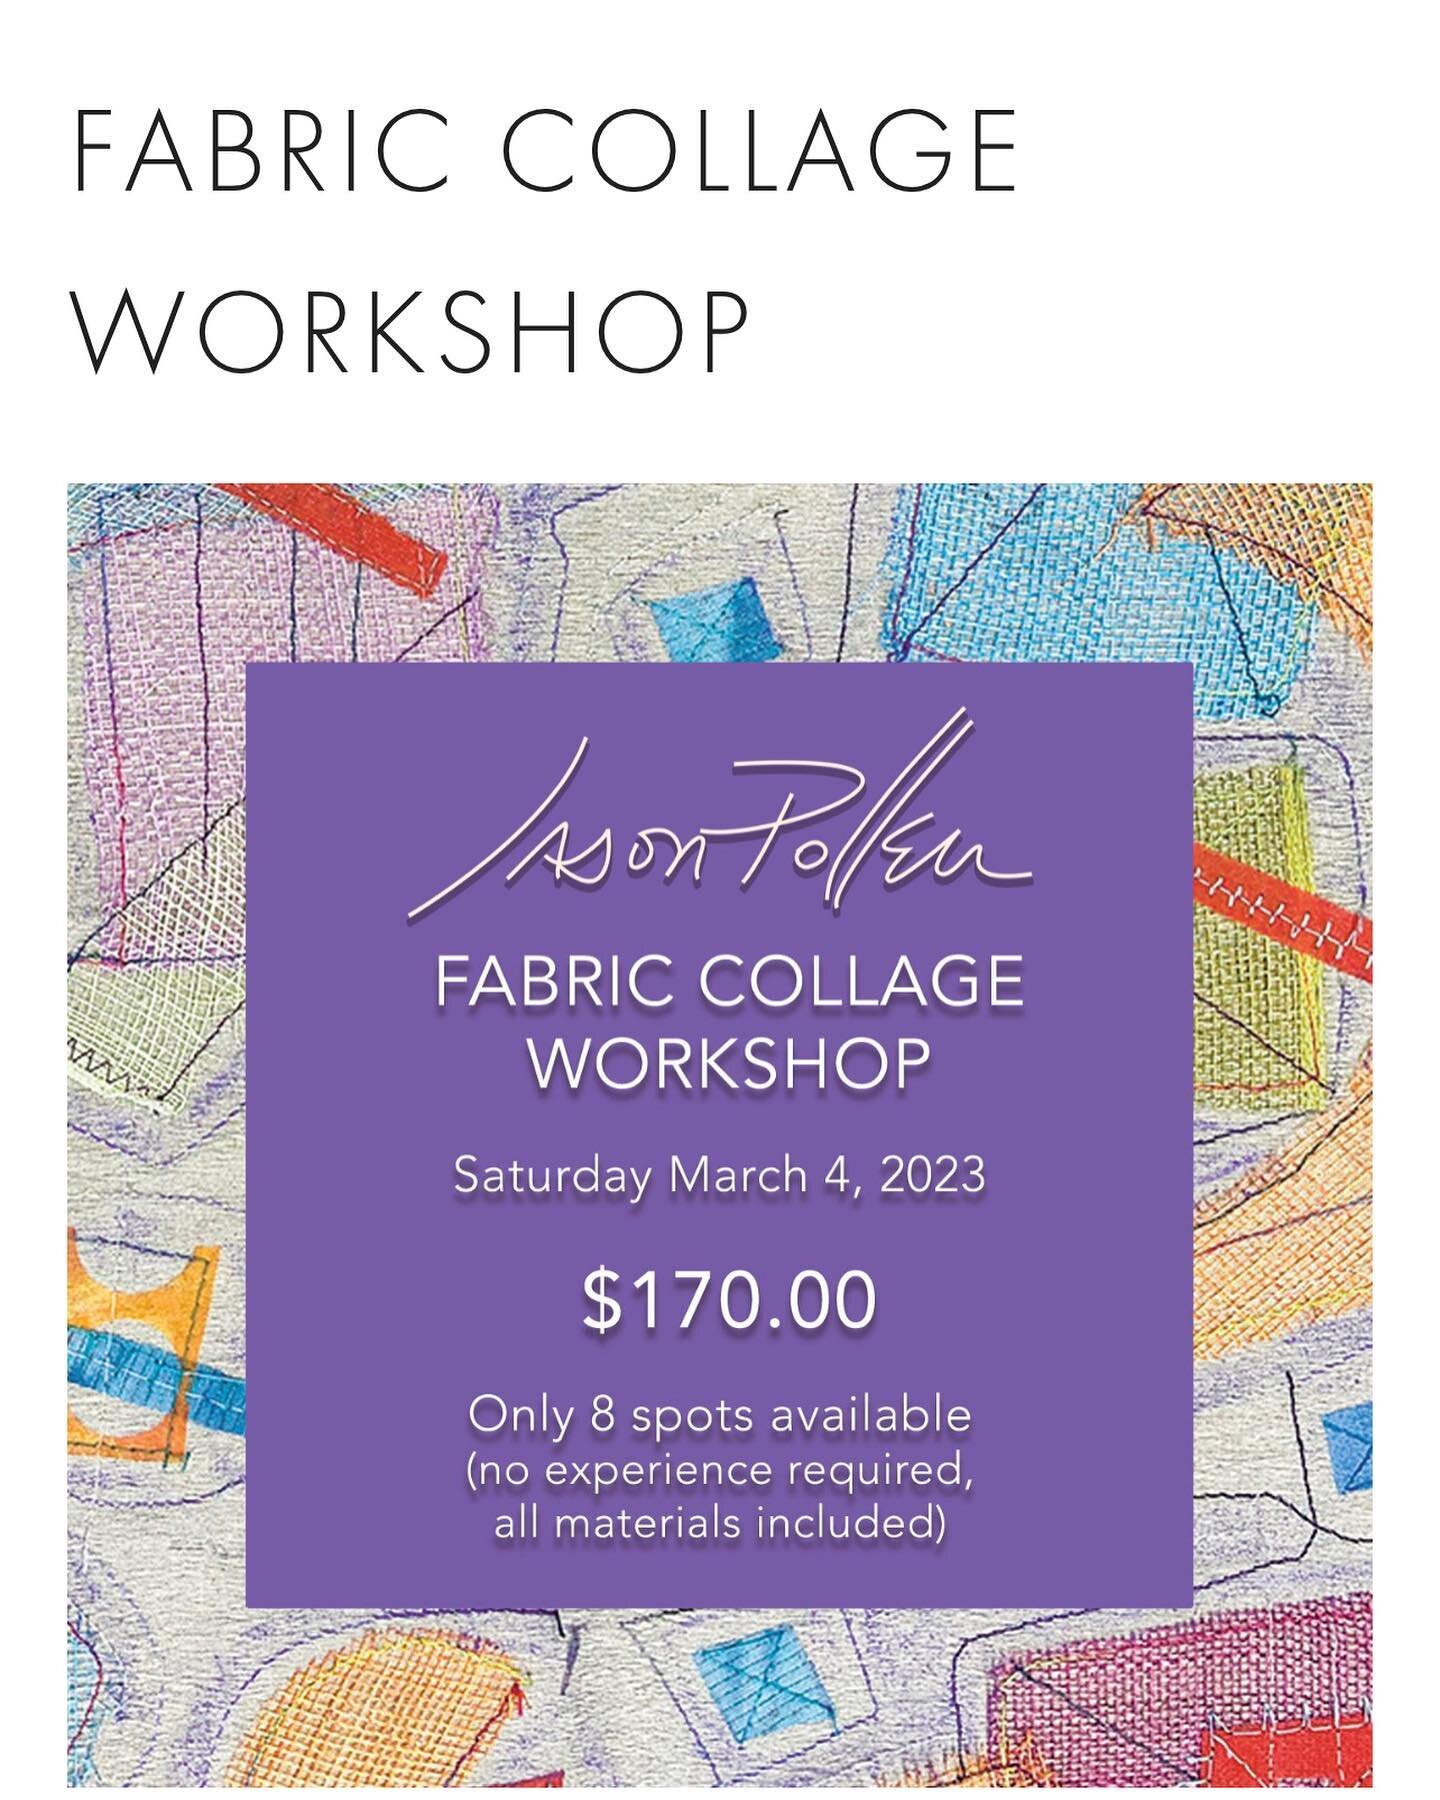 MoFA member and textile artist extraordinaire, Jason Pollen, is offering a discount on his fabulous collage class -  25% OFF using the code &ldquo;COLLAGE25&rdquo;. 

Jason's classes are fun, meaningful, and open up your ability to communicate visual